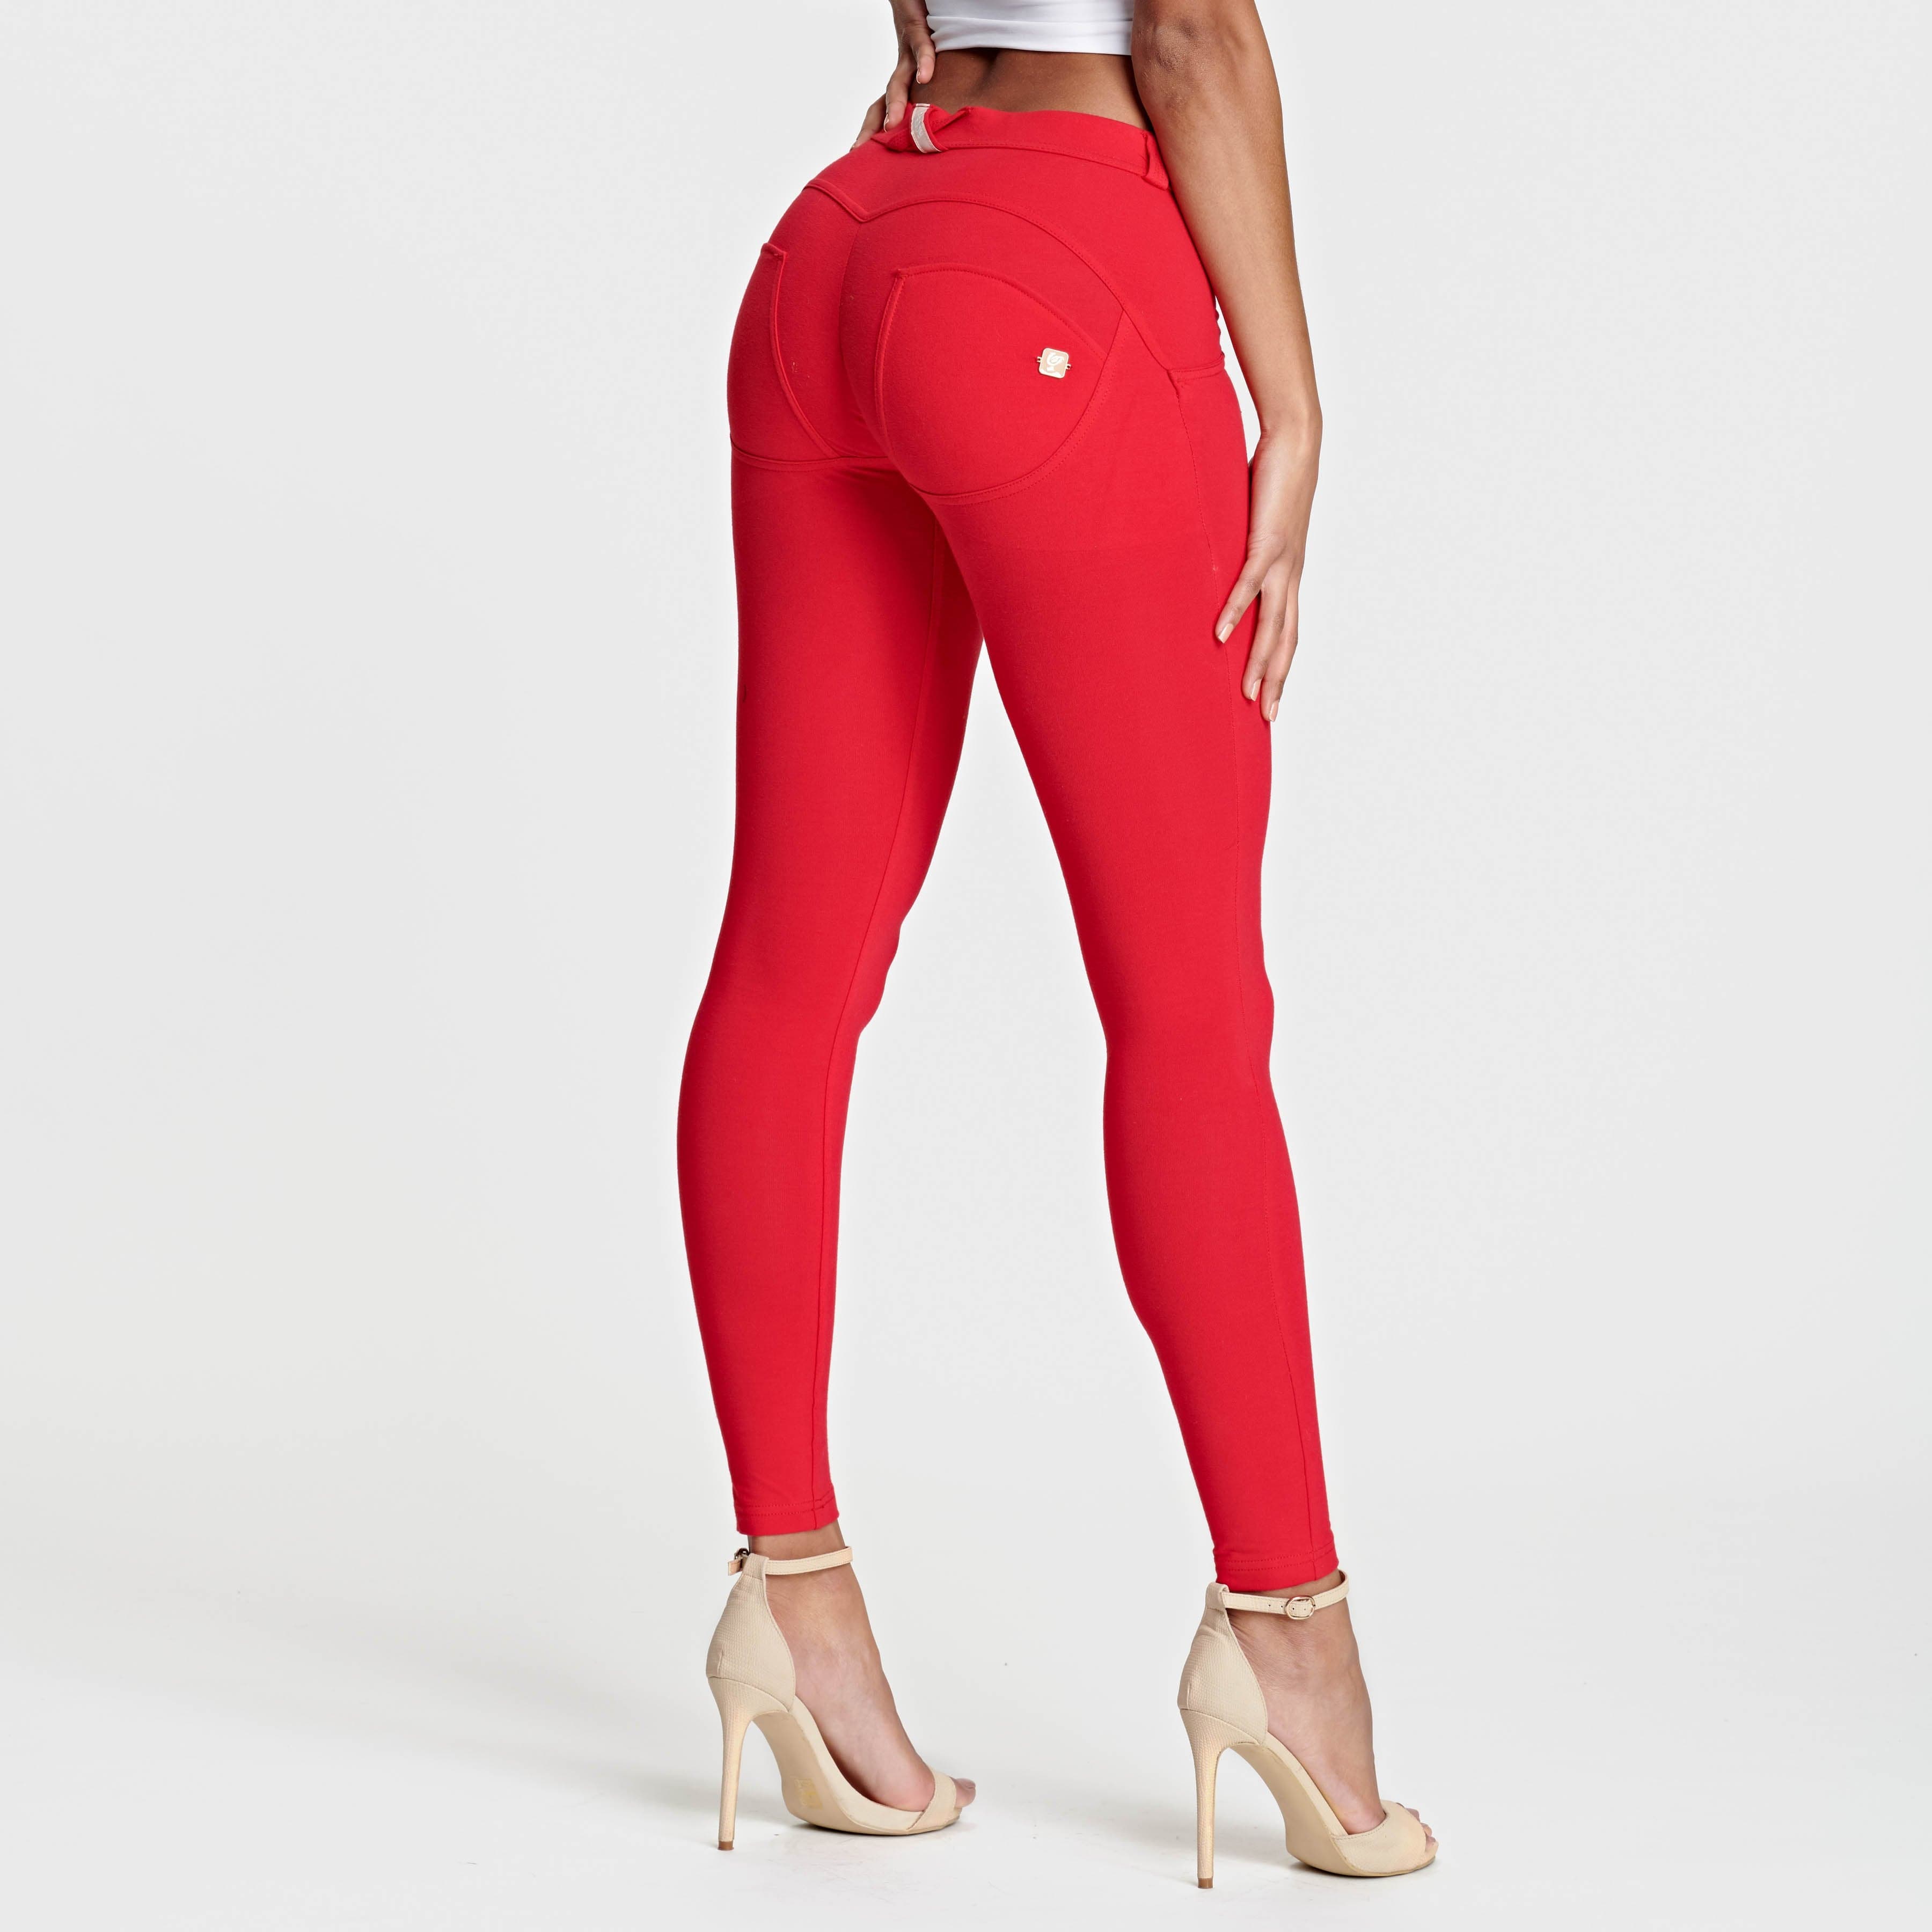 WR.UP® Fashion - Mid Rise - Petite Length - Red 1